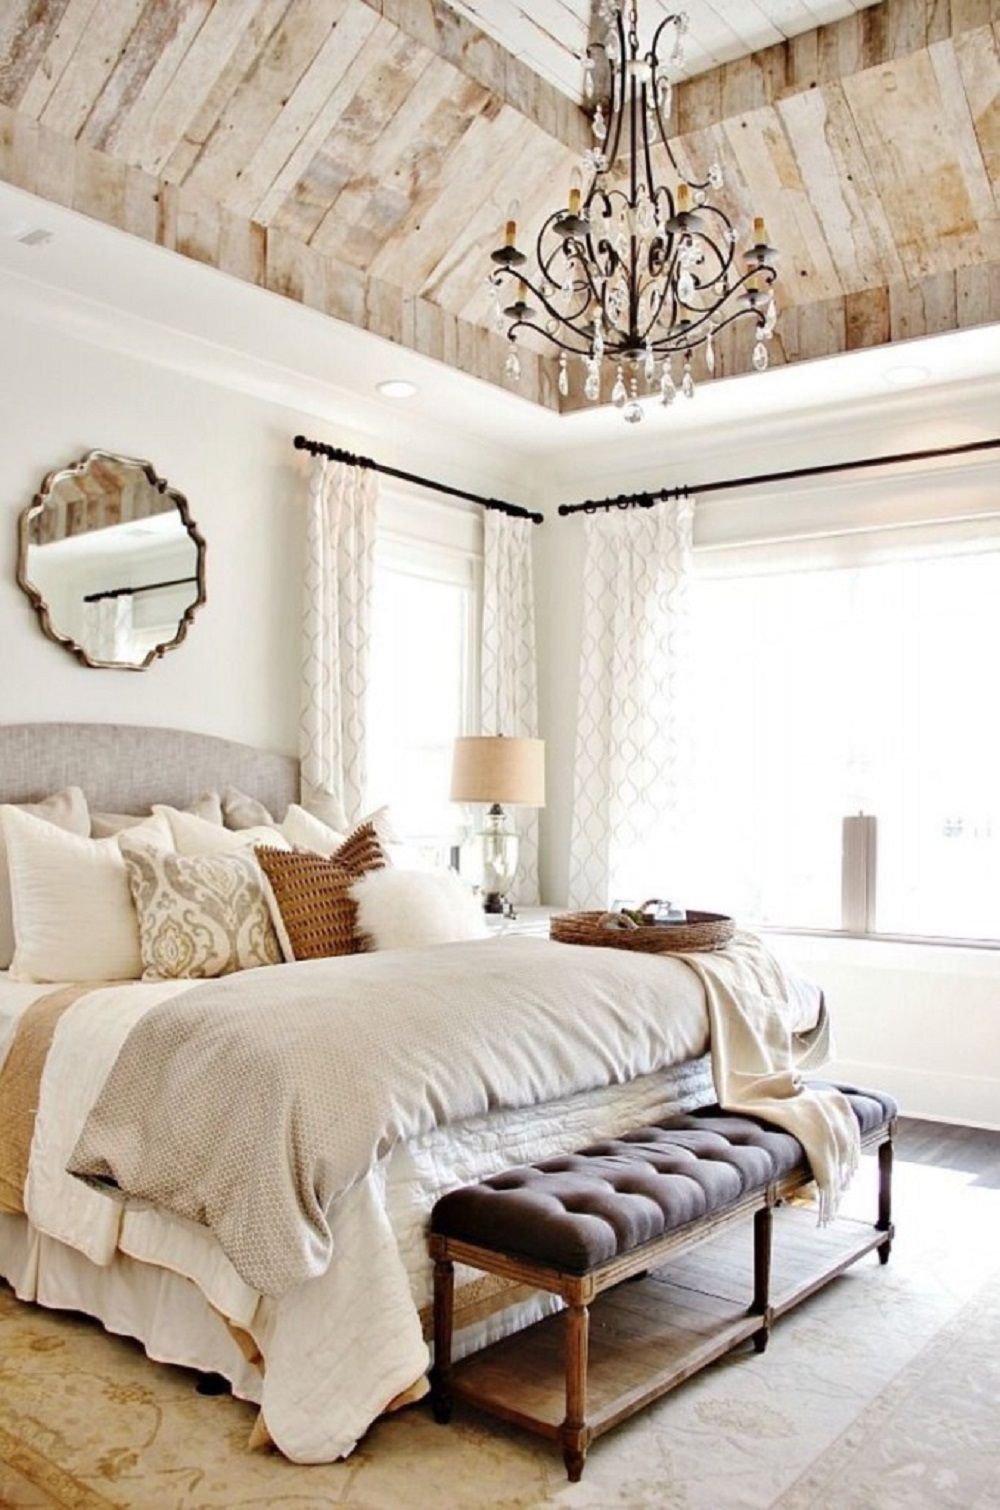 French Provincial Bedroom Furniture Unique Ideas for French Country Style Bedroom Decor